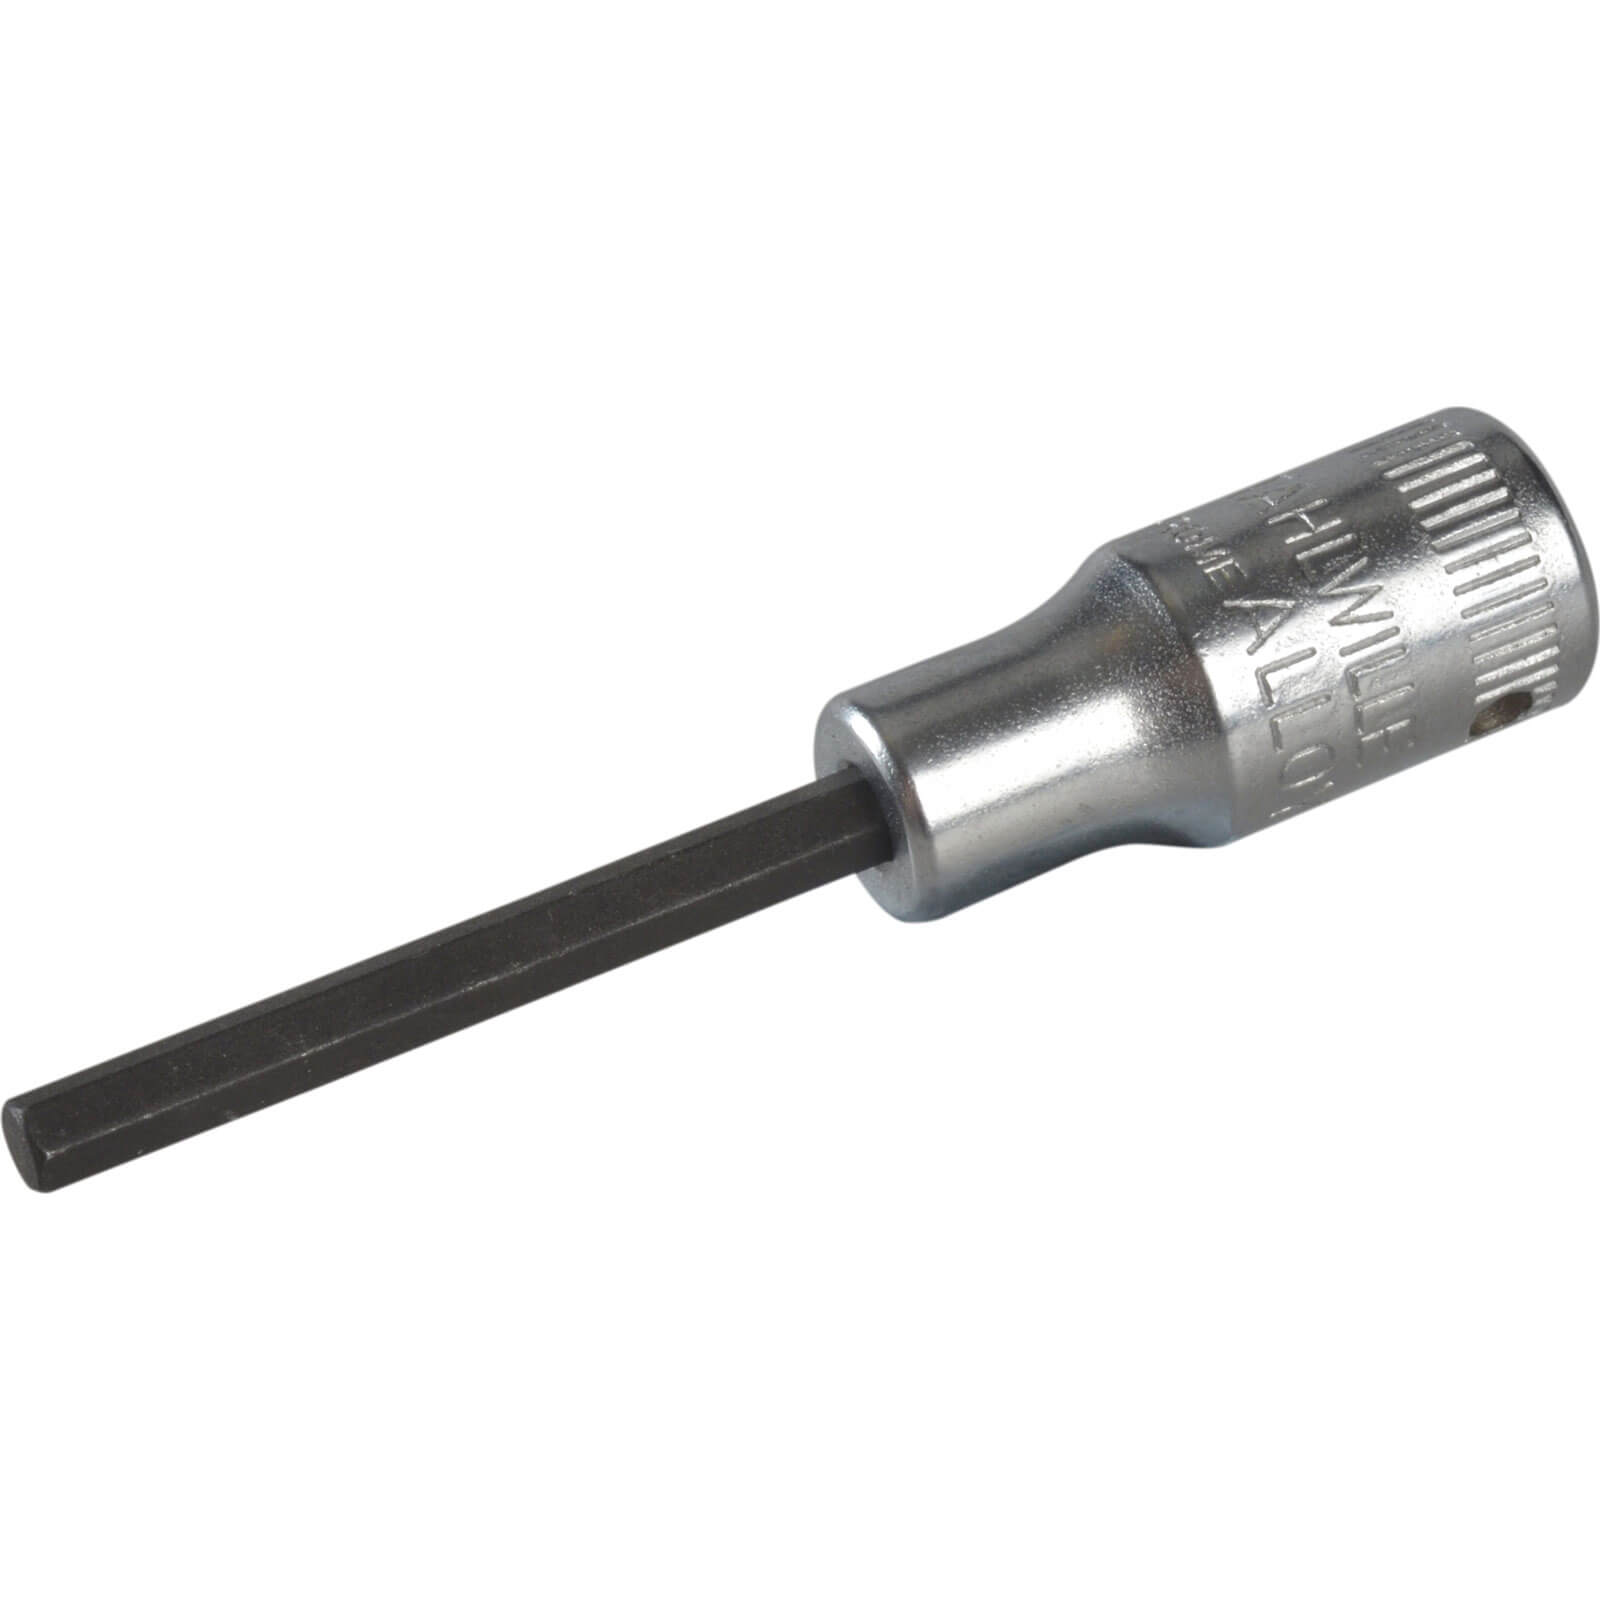 Image of Stahlwille 1/4" Drive Hexagon Socket Bit Imperial 1/4" 1/16"